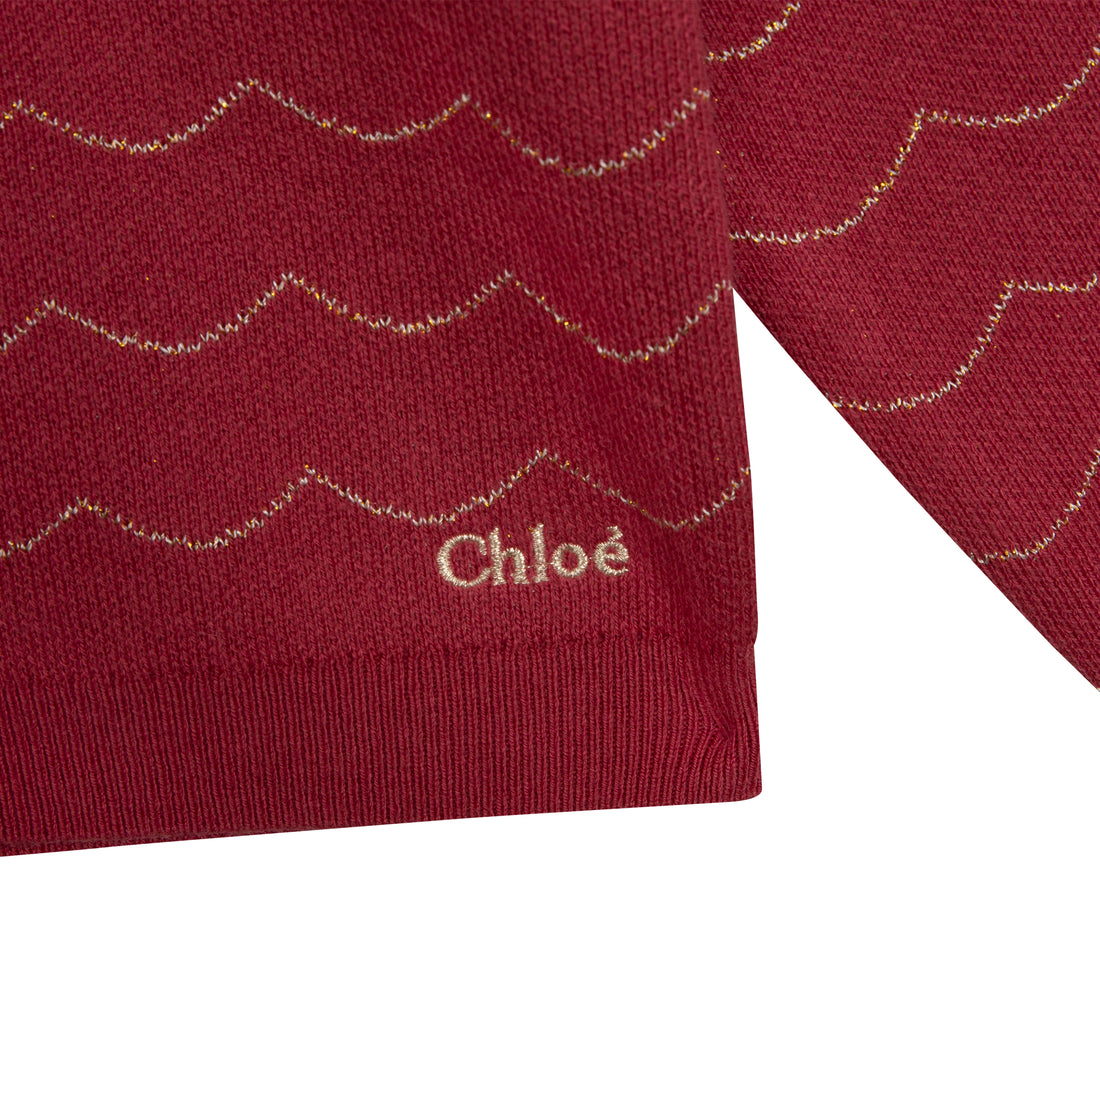 Chloe Pink Scallops Embroidered Sweater